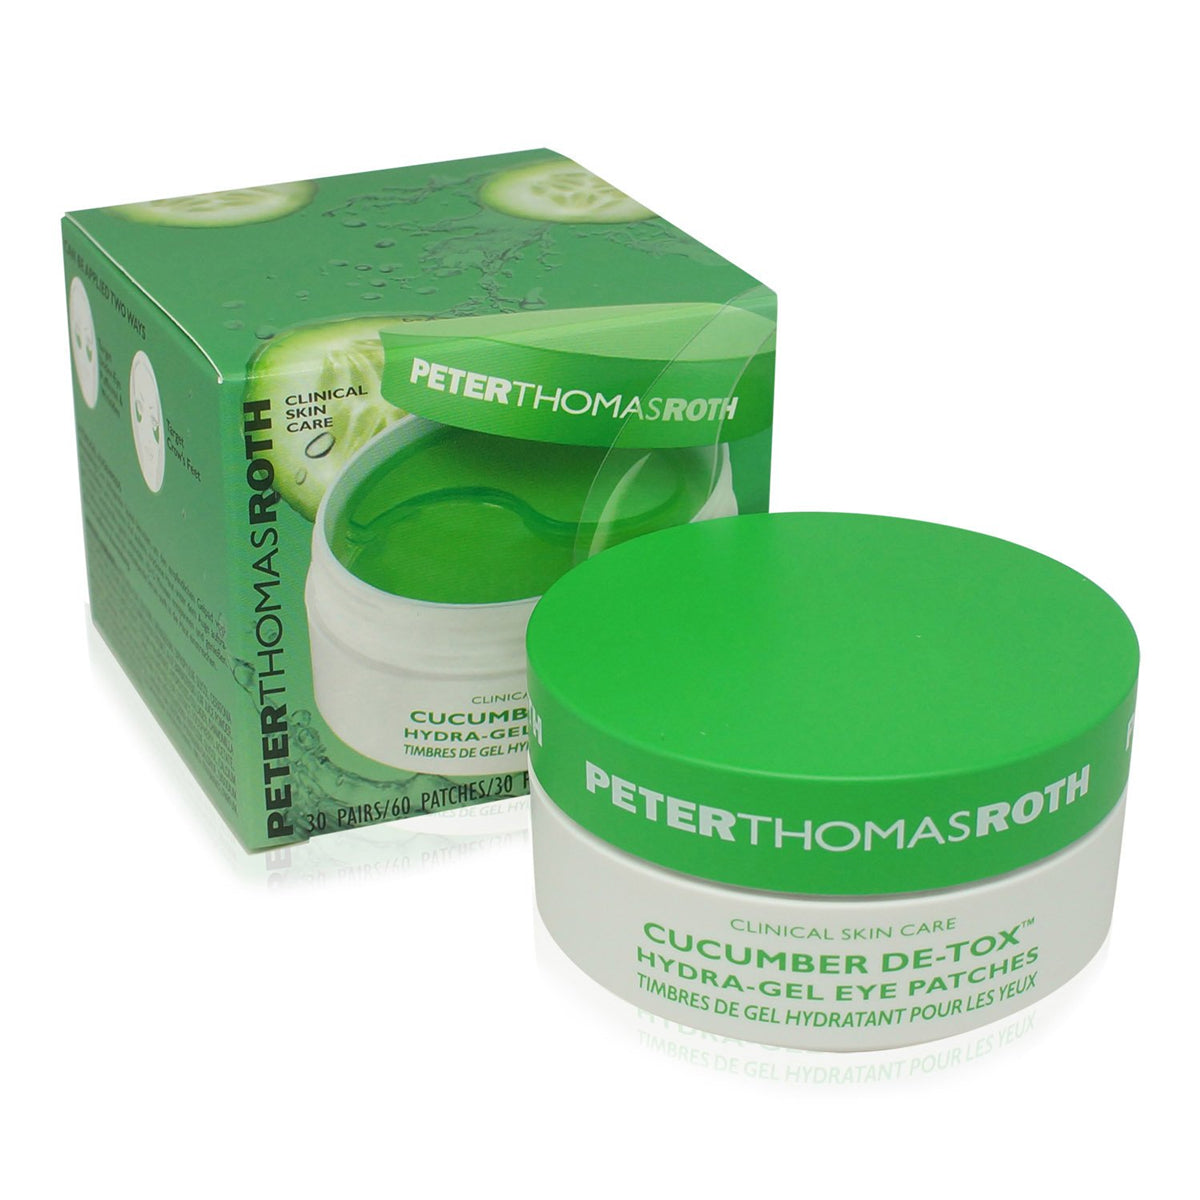 Peter Thomas Roth Cucumber De-Tox Hydra-Gel Eye Patches 60 Patches